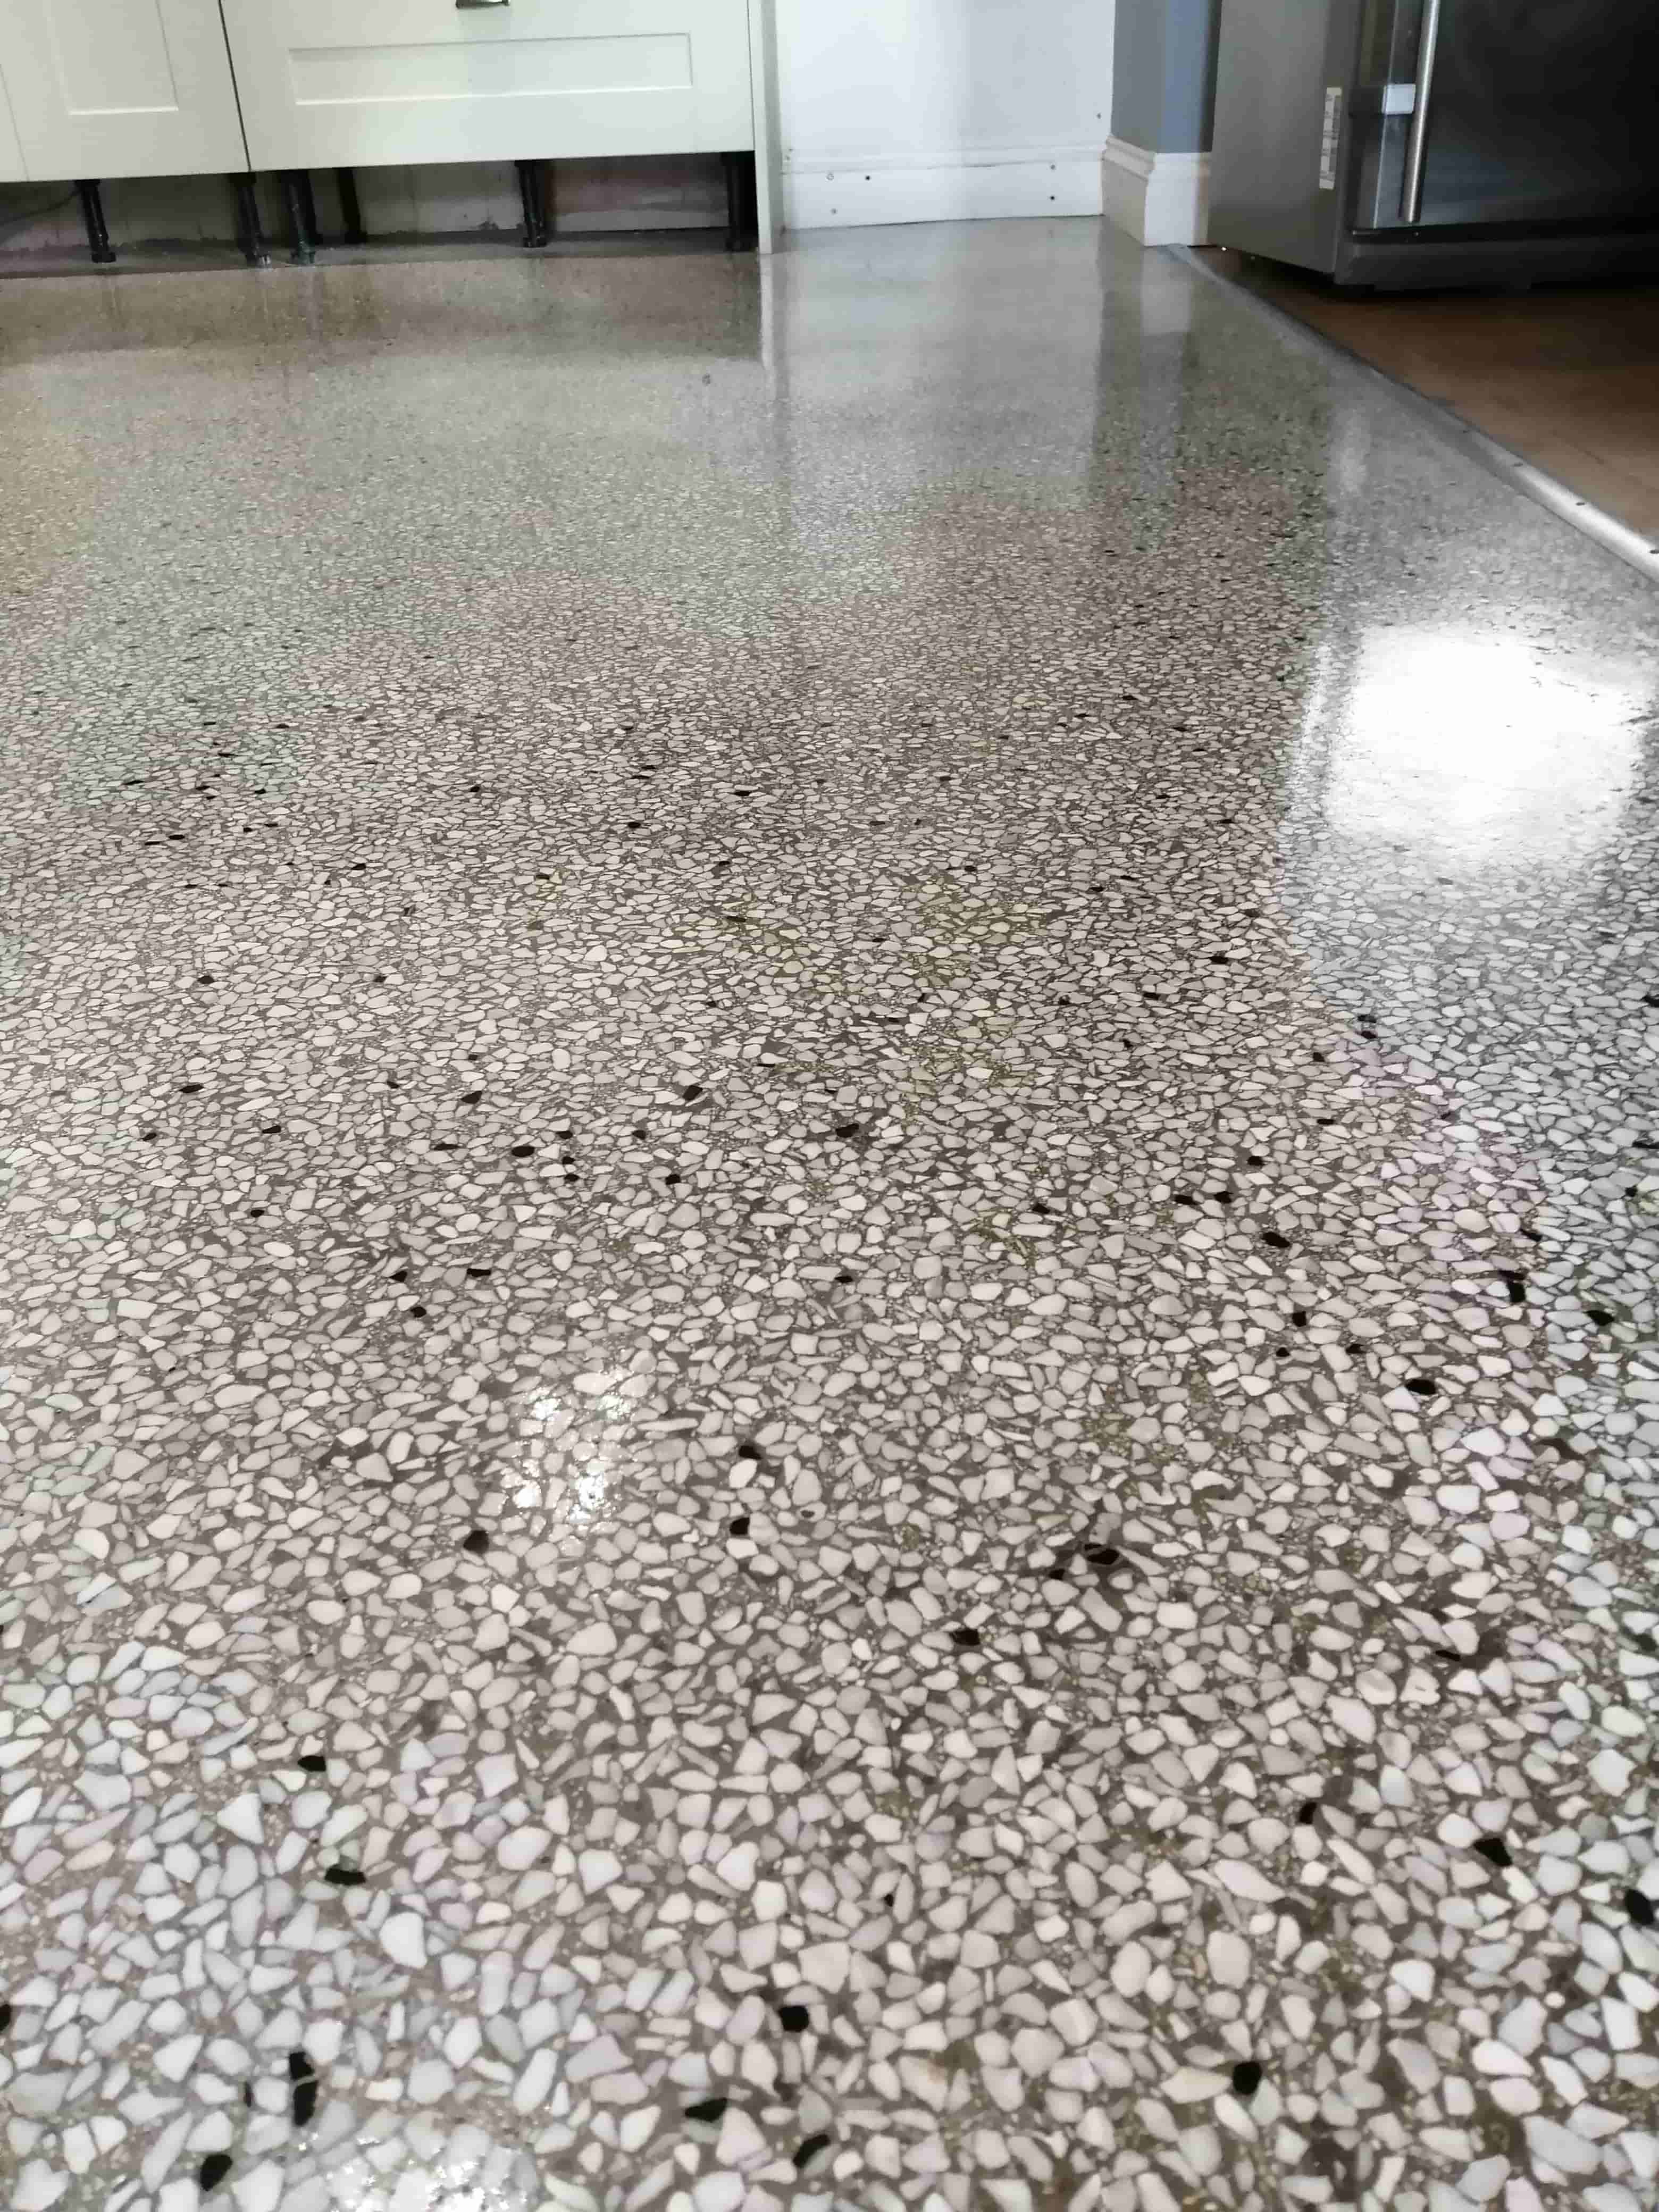 Terrazzo Tiled Floor After Cleaning Church Vestry Penarth